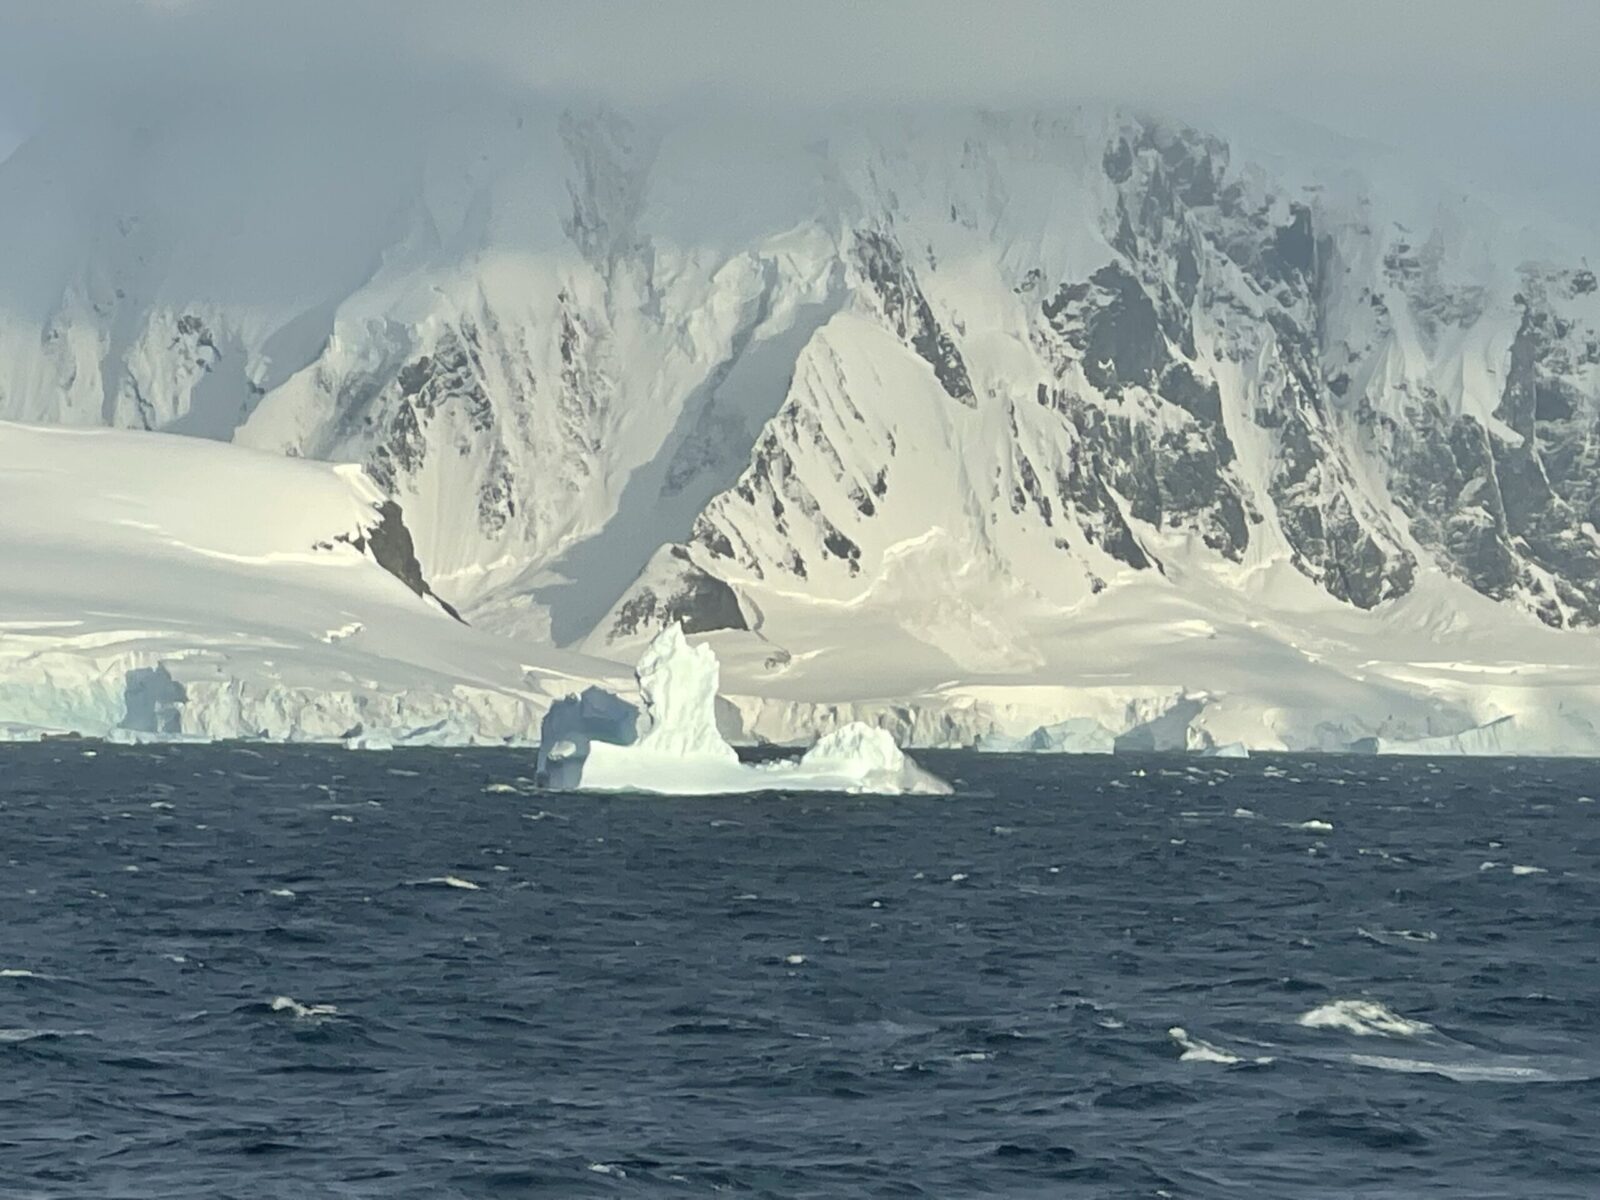 Snowy Mountains and Icebergs